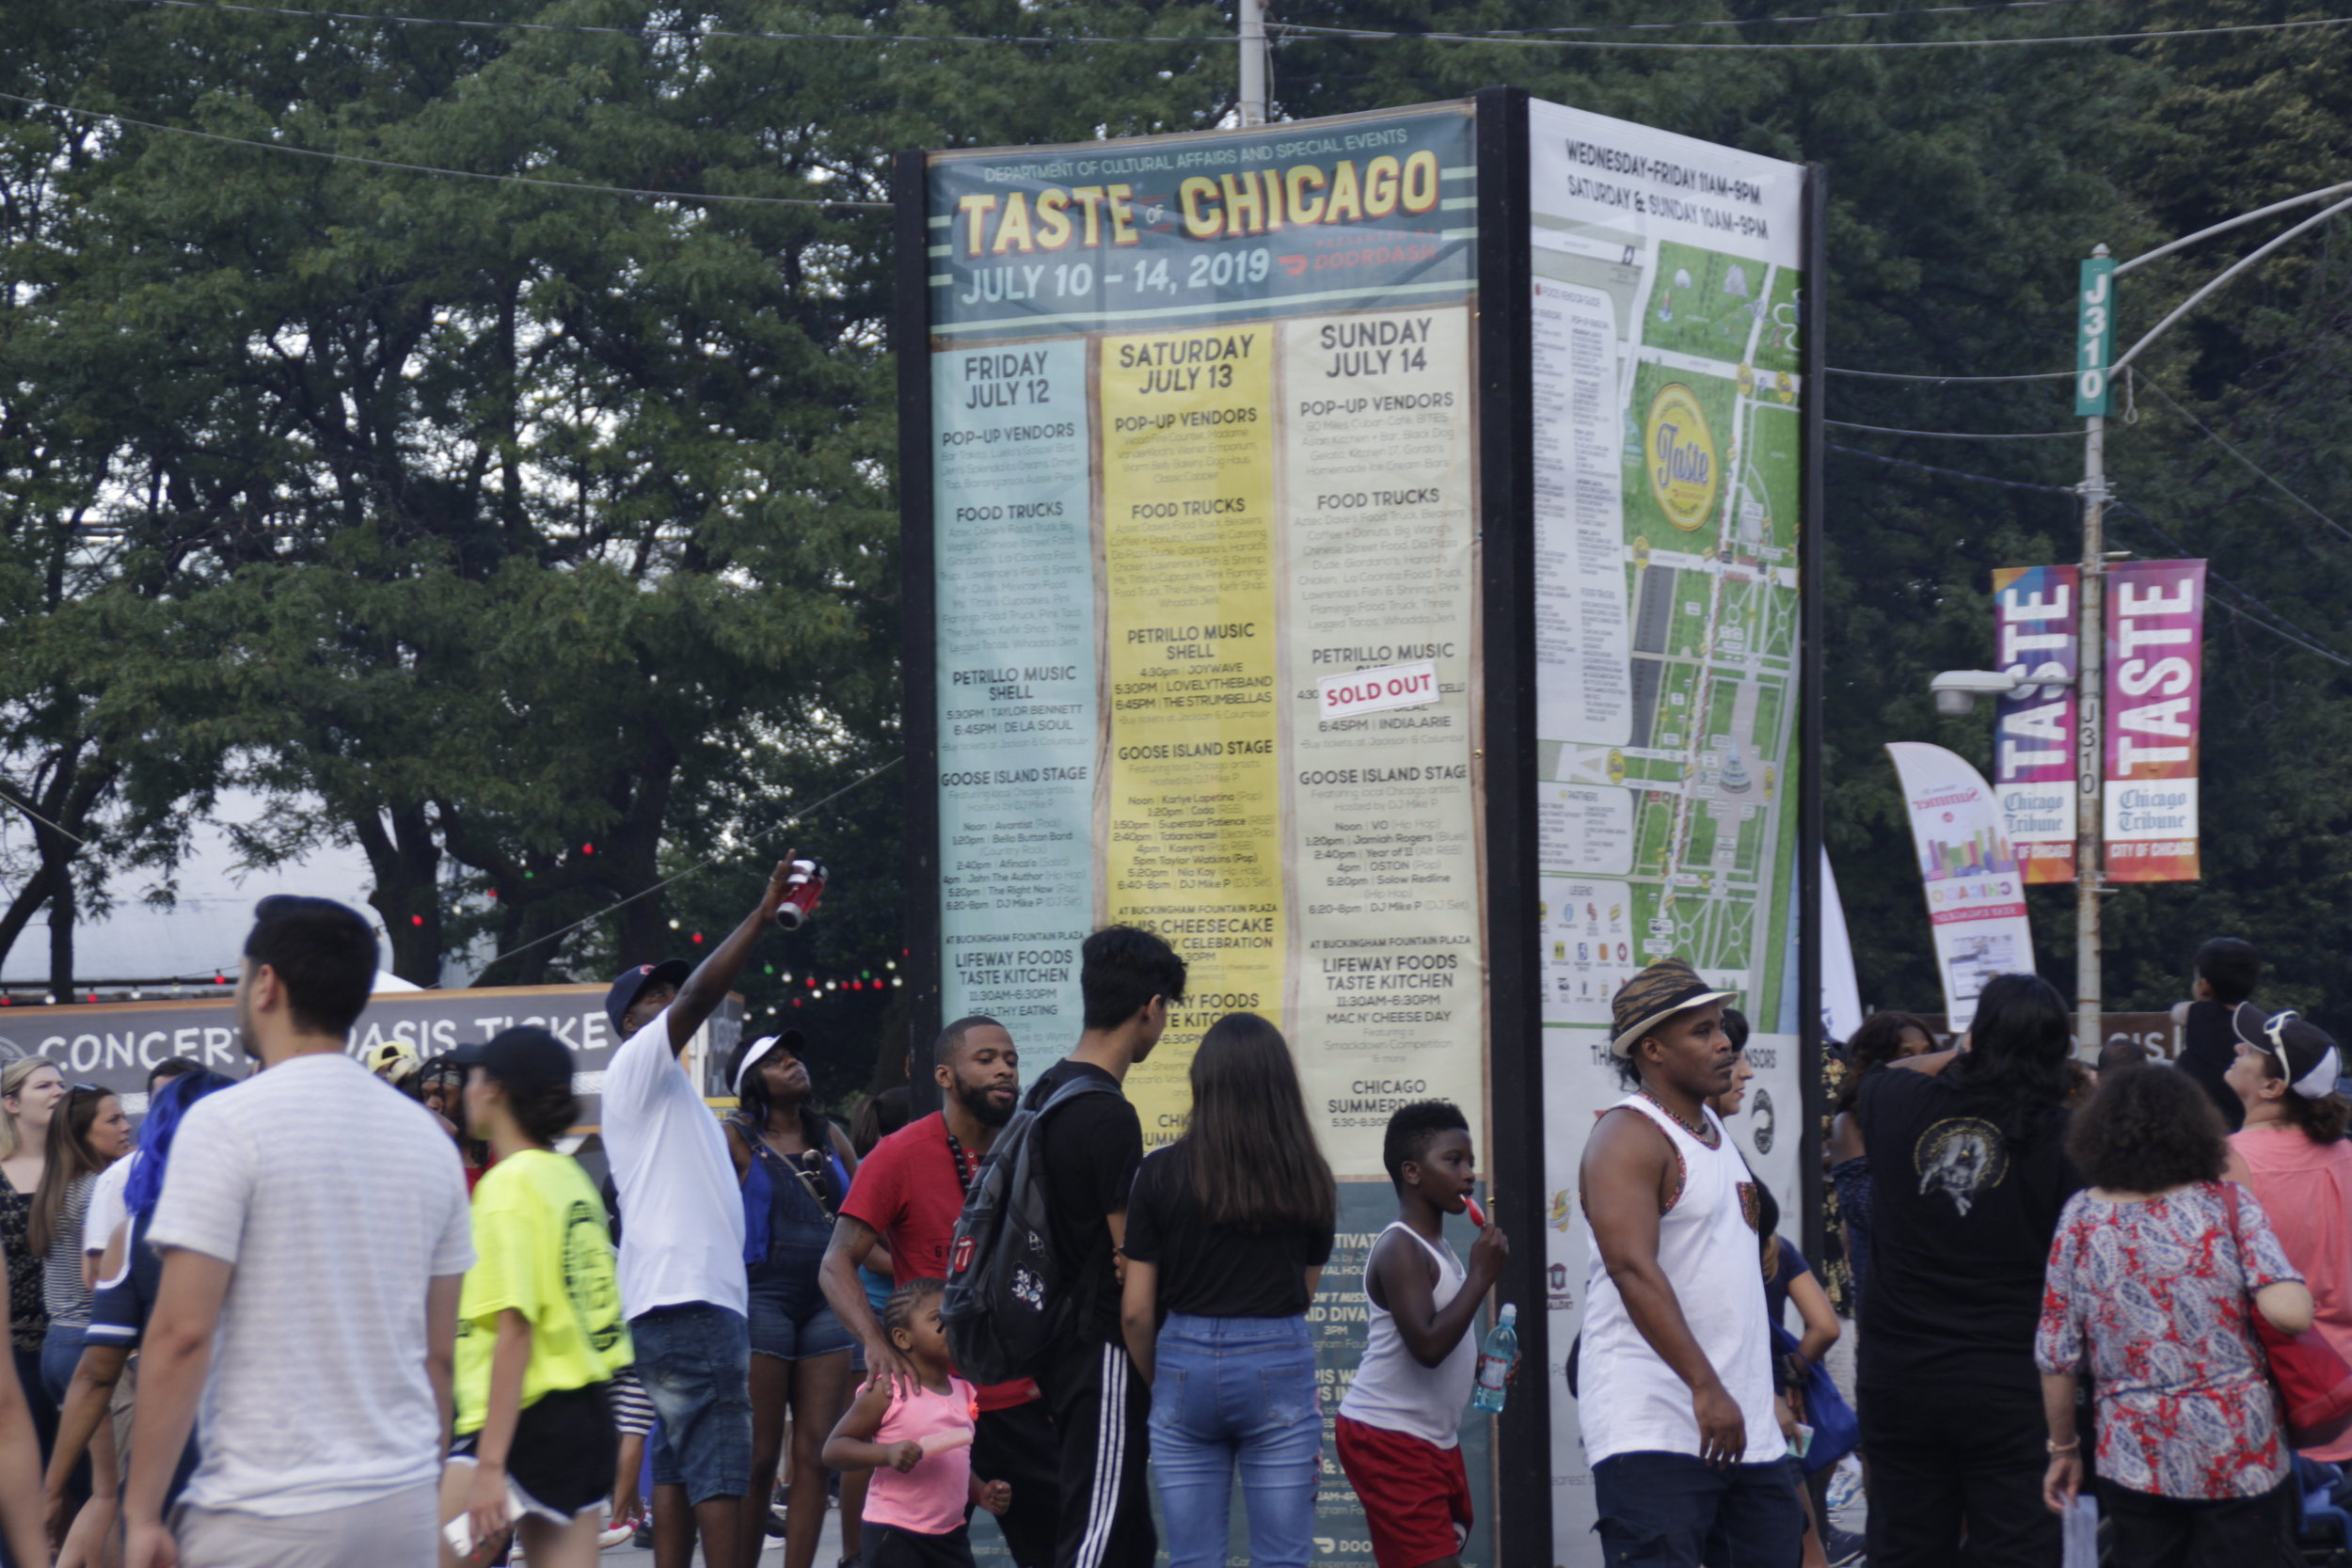  Crowds dispersed on the last day of the 2019 Taste of Chicago as people stopped to look up more information and ask for directions while planning out their day. The display in the middle of the event that served as a map. 